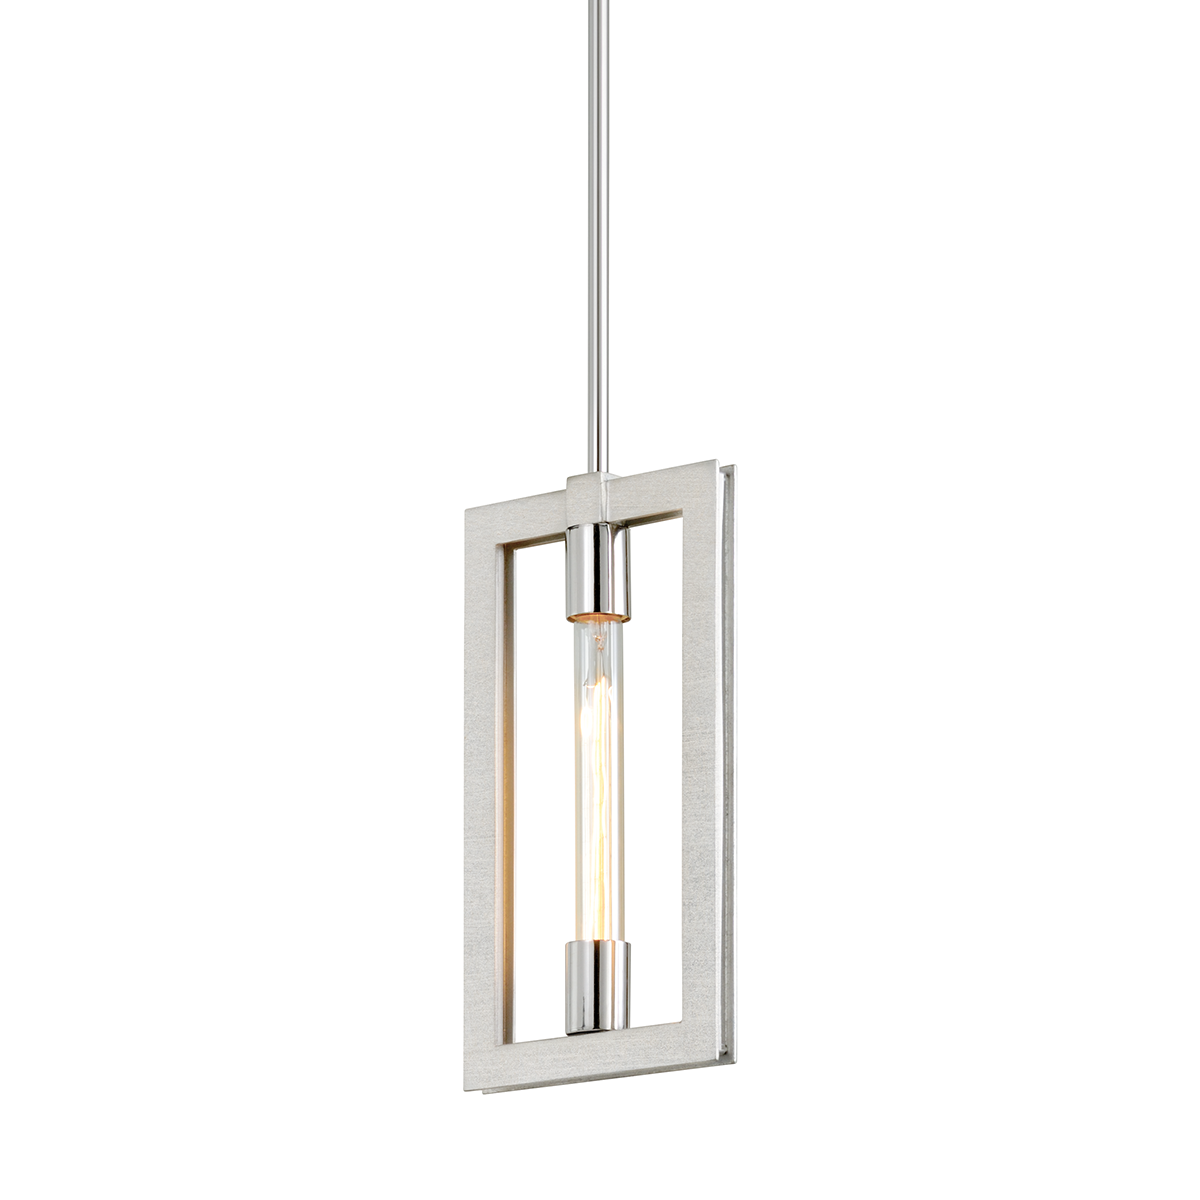 Troy Lighting Enigma Pendant Pendant Troy Lighting SILVER LEAF W STAINLESS ACC 1.5x7.75x14.25 